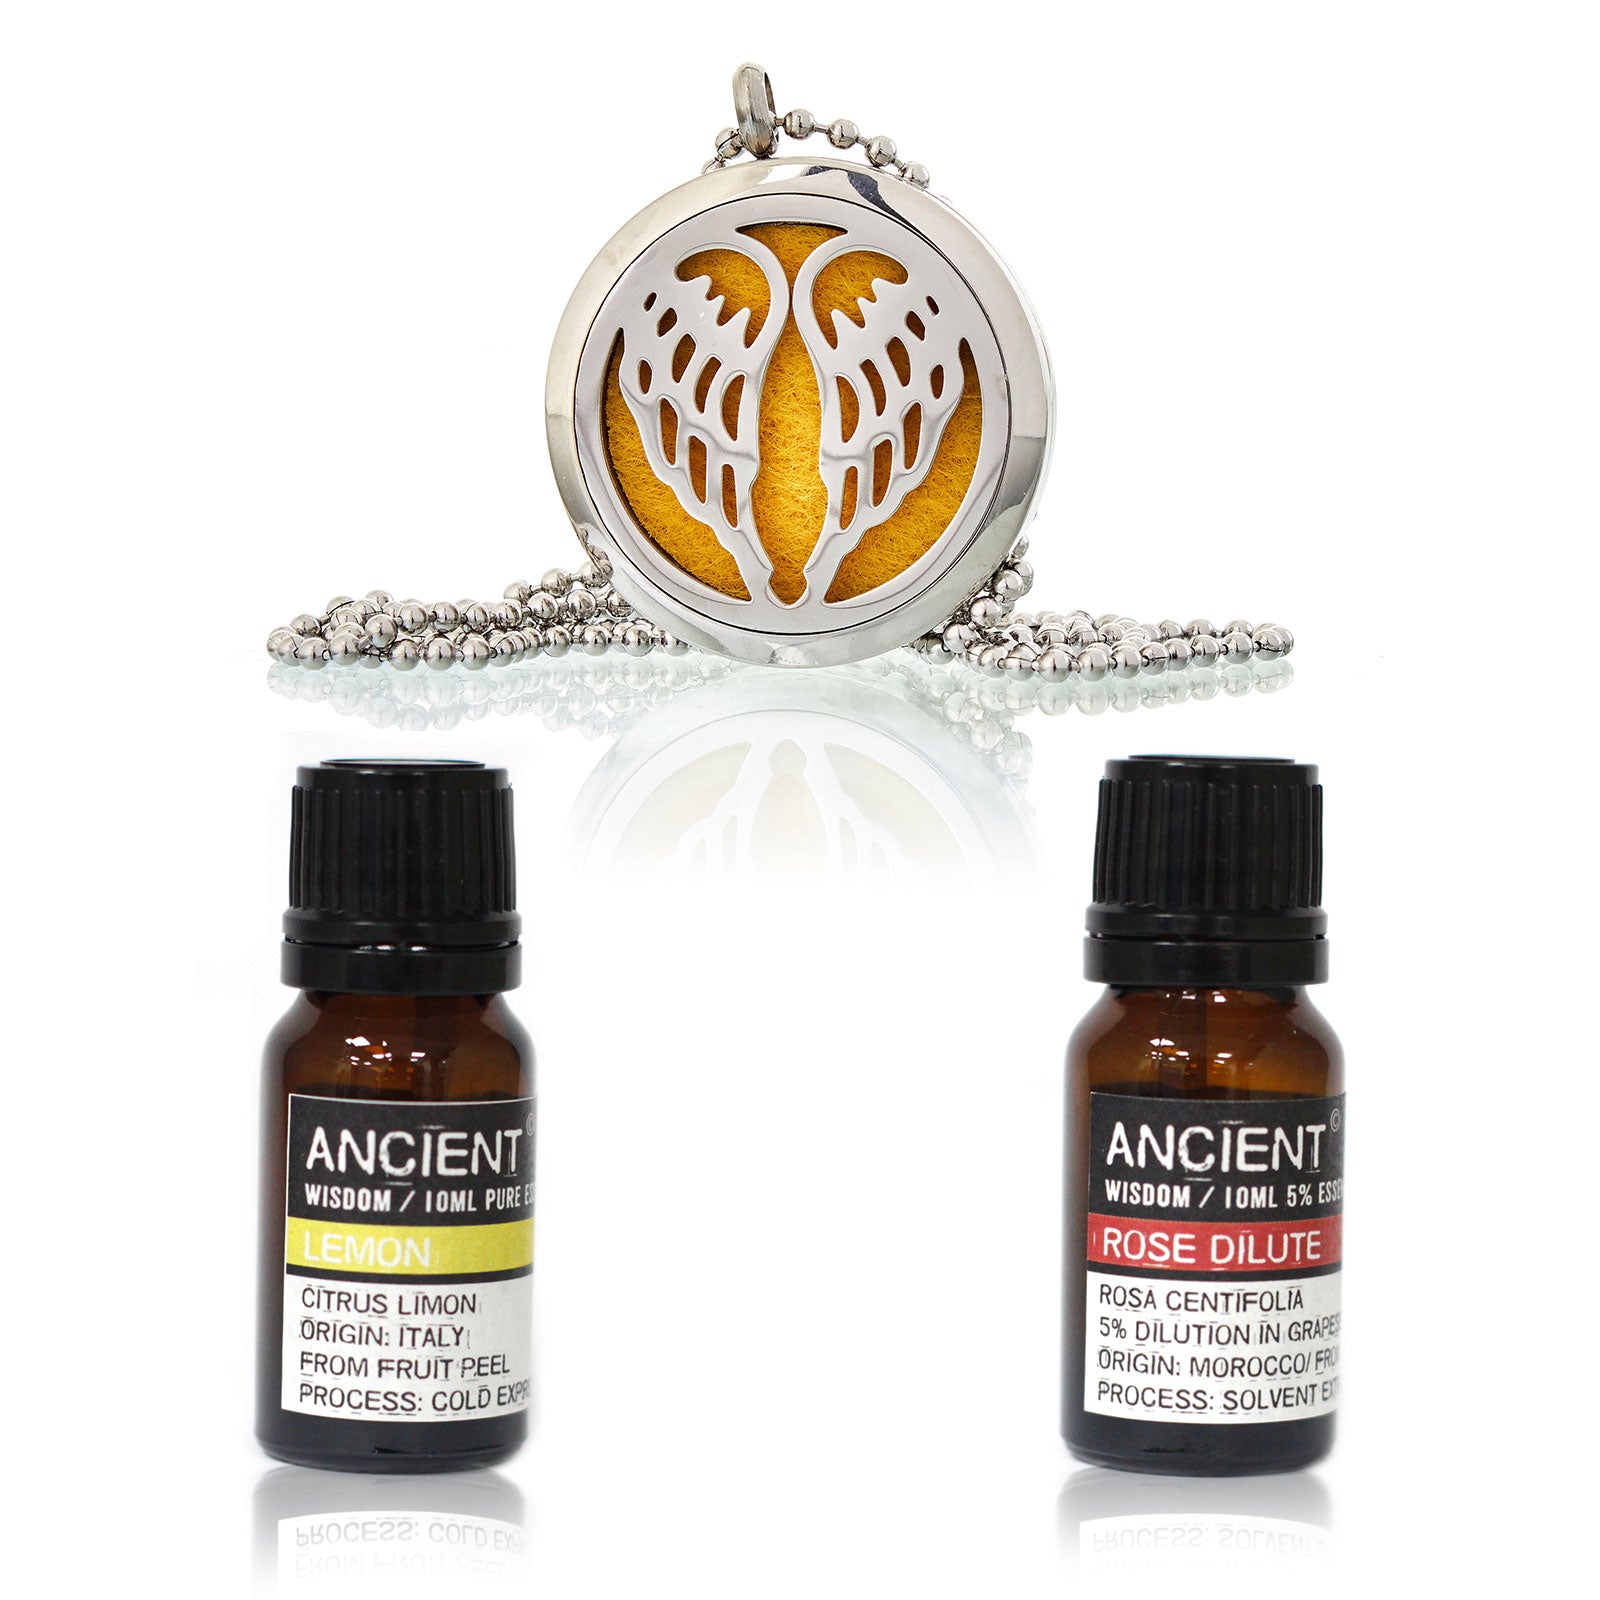 View Diffuser Necklace and Essential Oils Set information